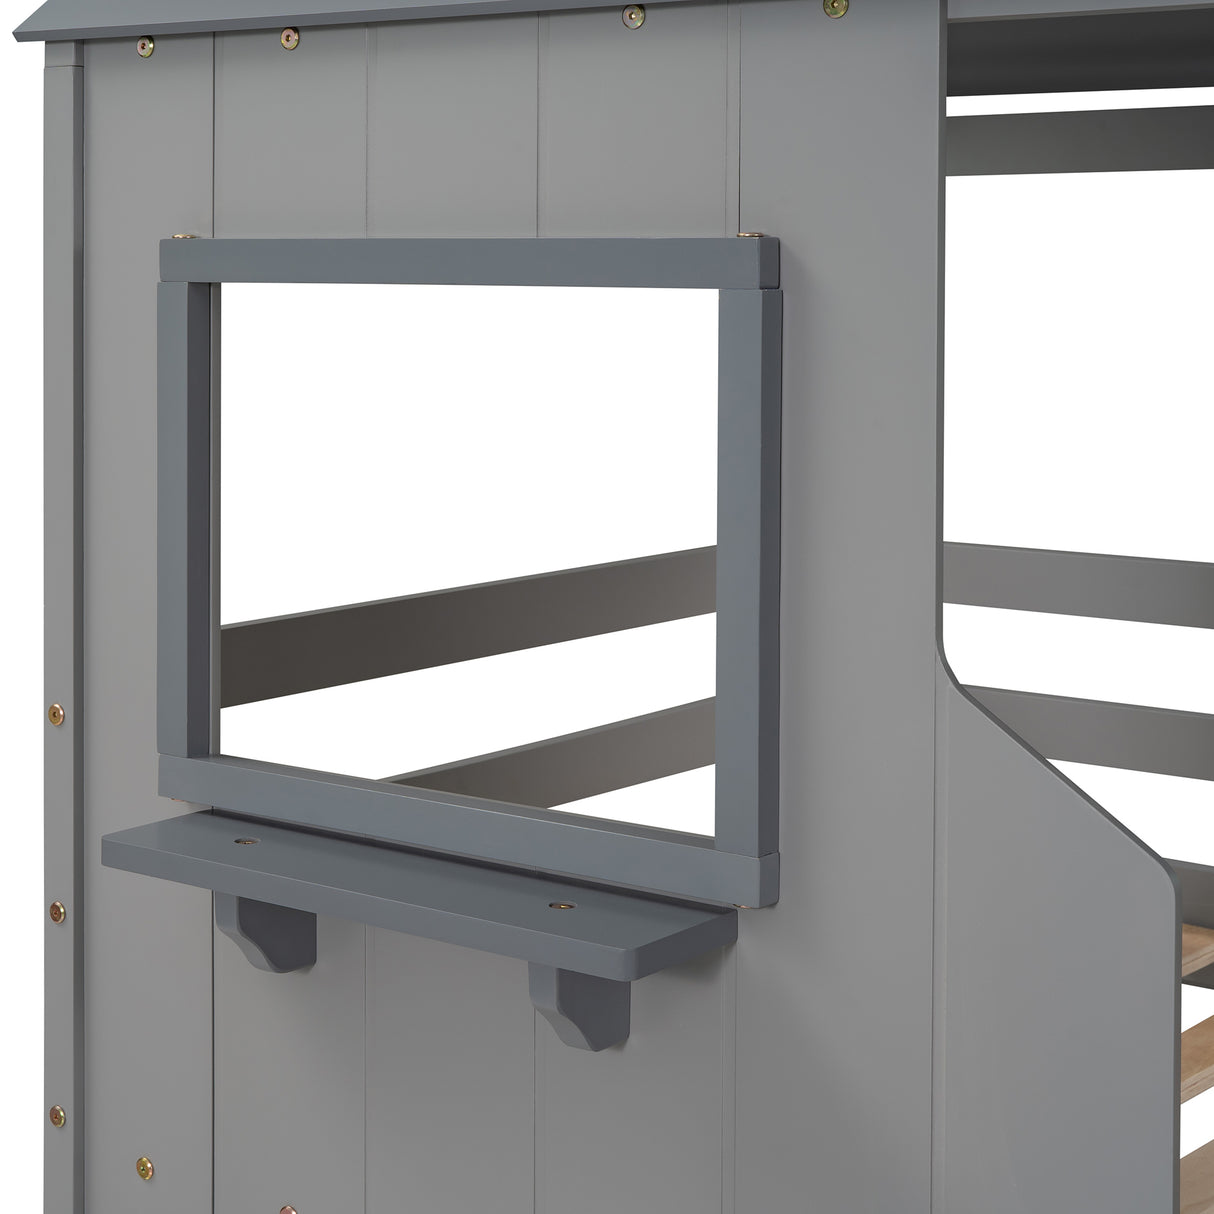 Twin Over Twin Bunk Bed Wood Bed with Roof, Window, Guardrail, Ladder (Gray)(OLD SKU :LP000045AAE) - Home Elegance USA